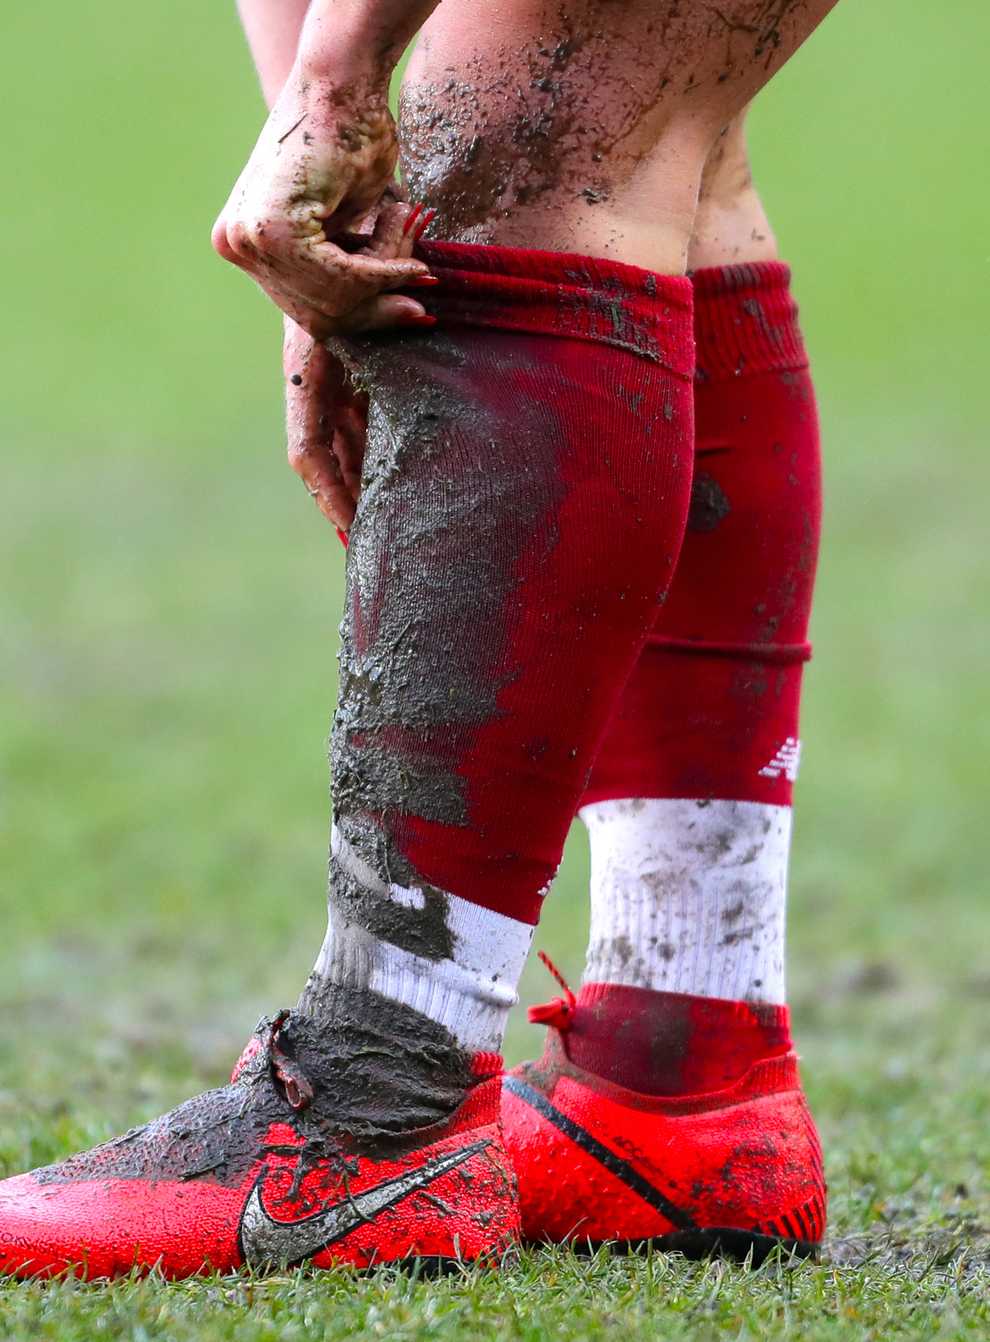 Liverpool have called off their WSL match due to pitch conditions (PA Images)